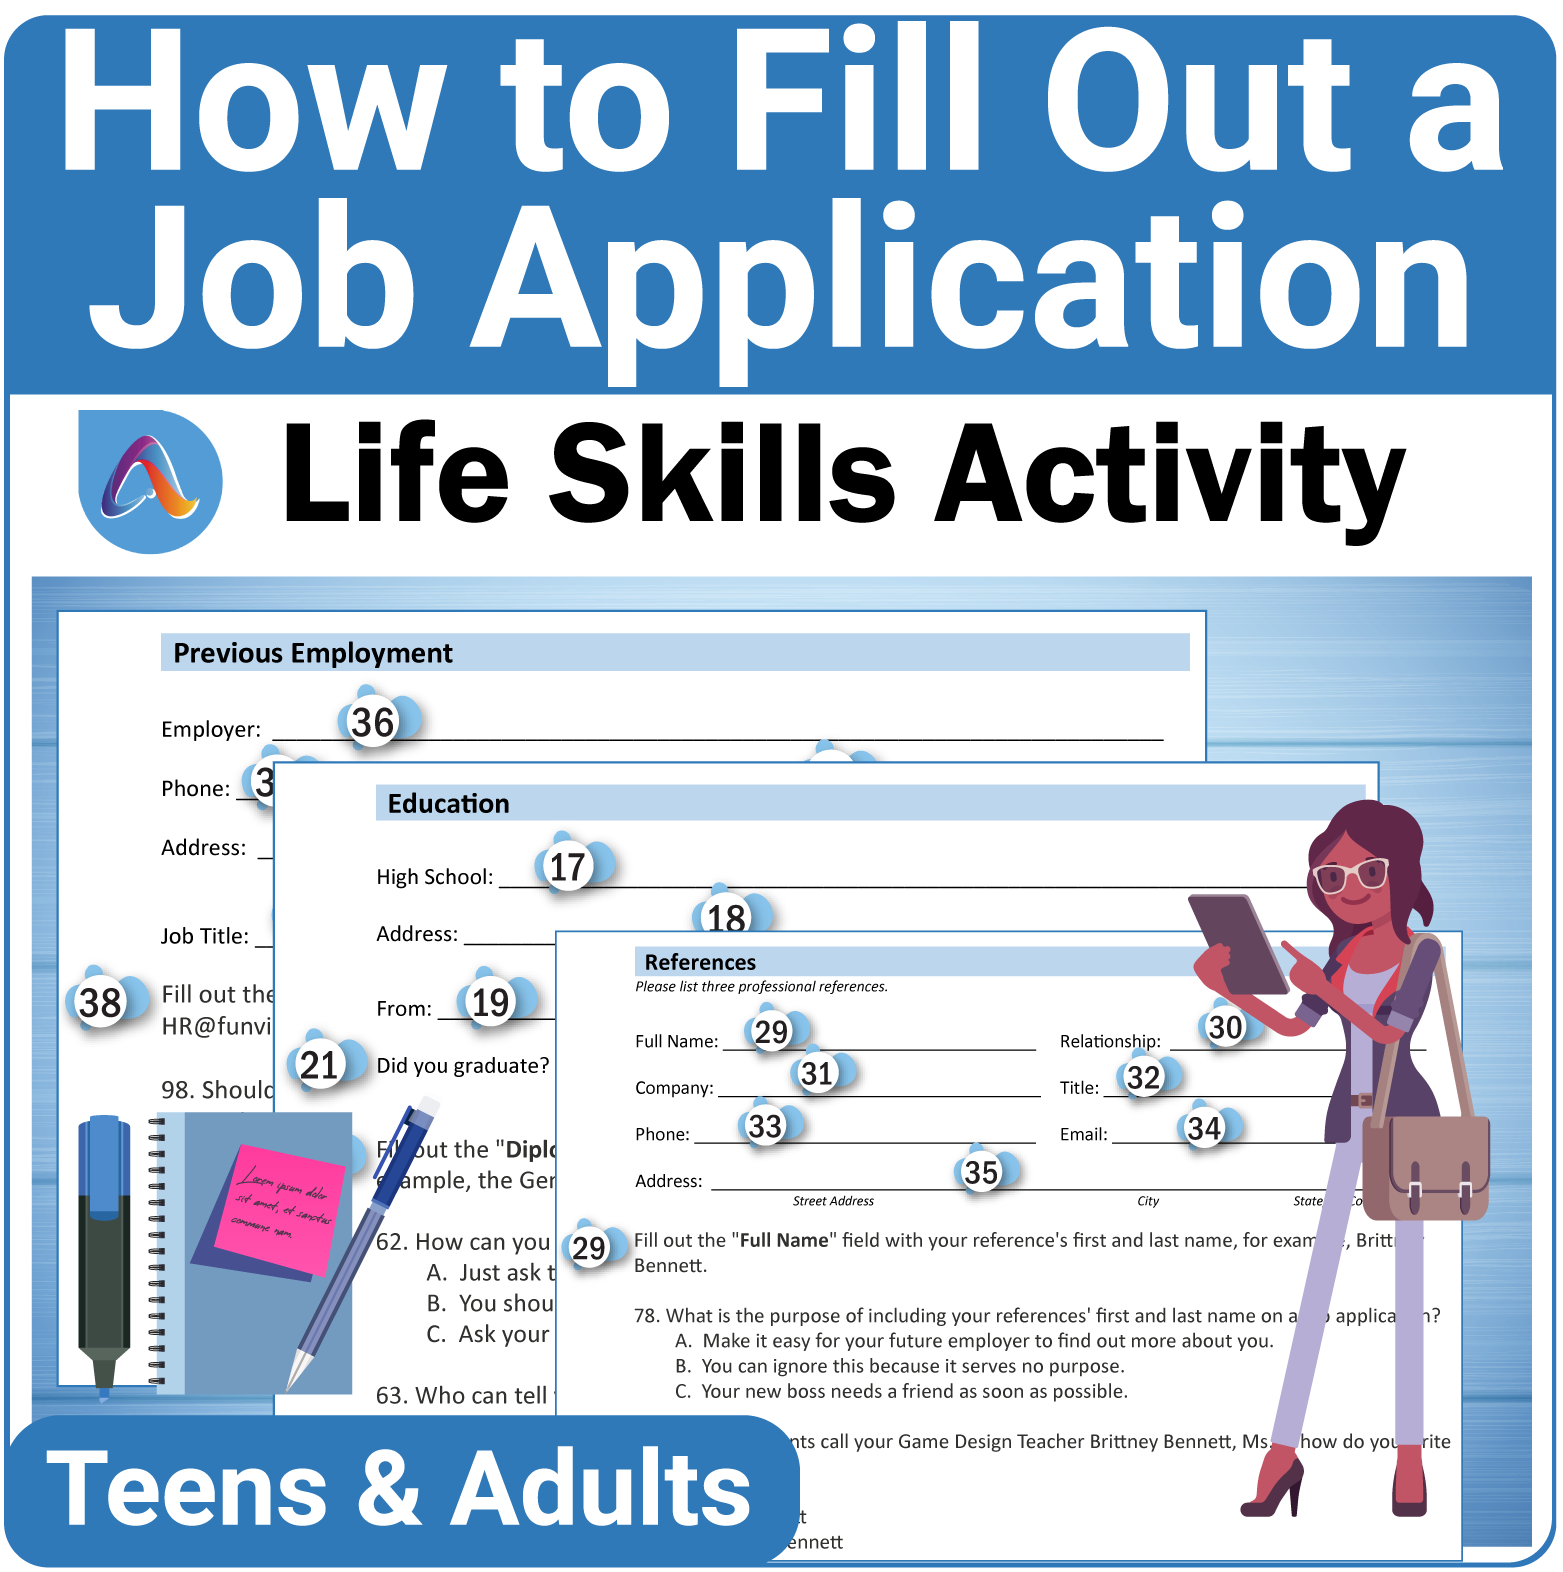 How to Complete a Job Application a Practical SEL Life Skills Activity